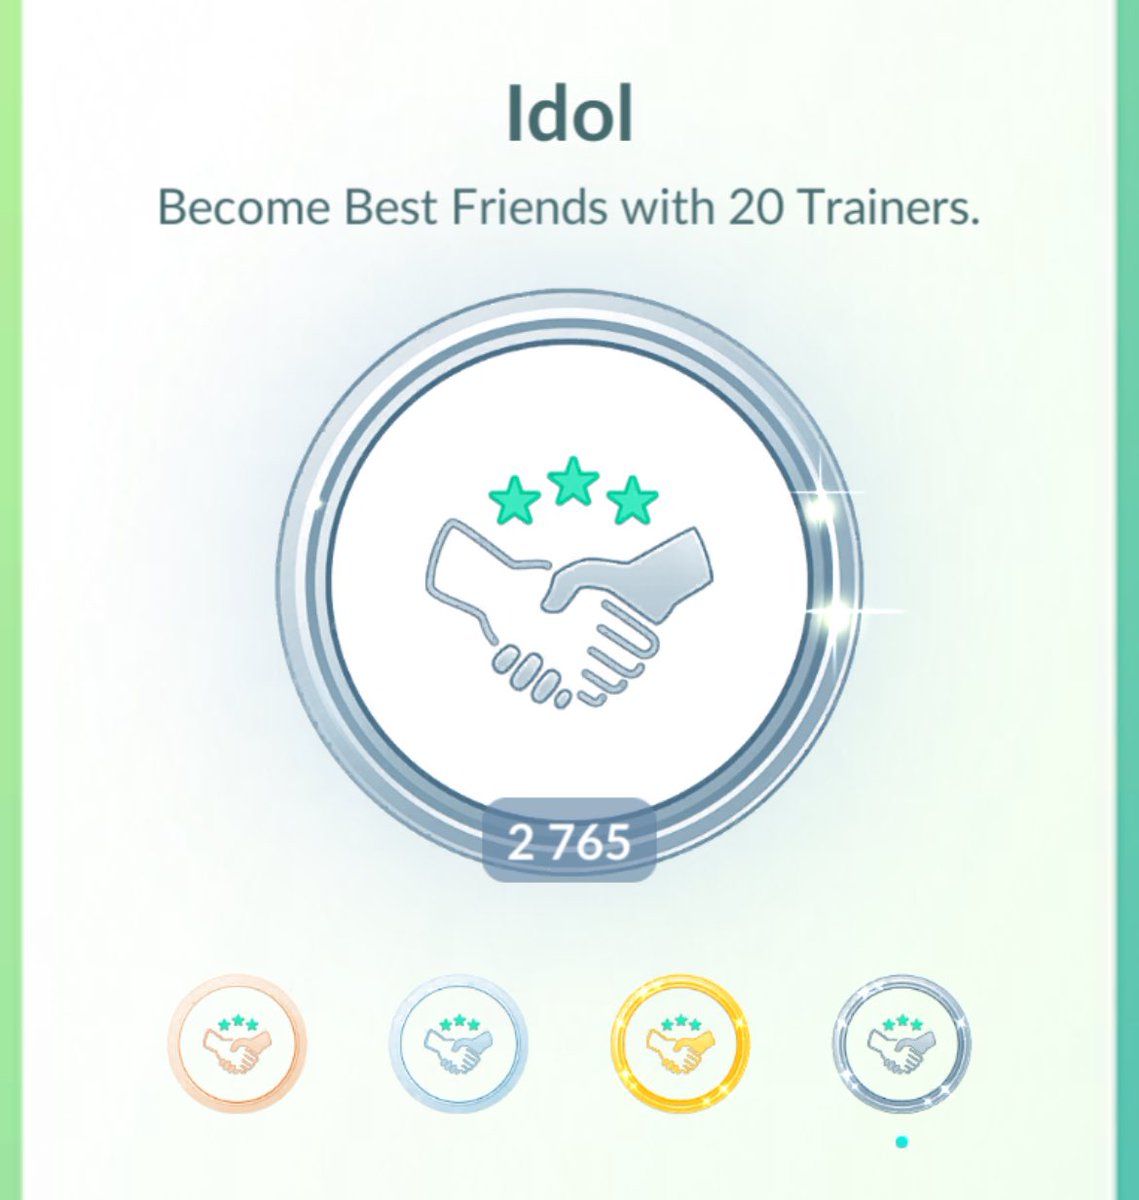 ‼️‼️‼️

Looking for 30 new DAILY openers in #PokemonGO 

🎁 I send every day -> just open
❌ I do not 🥚 = open anytime!
⚠️ No delays!
✅ Bf in <95 days

629527312395

#PokemonGOfriend 
#PokemonGoFriendCodes #PokemonGOApp 
#PokemonGOfriends
#pokemongocode 
#lookingforfriends